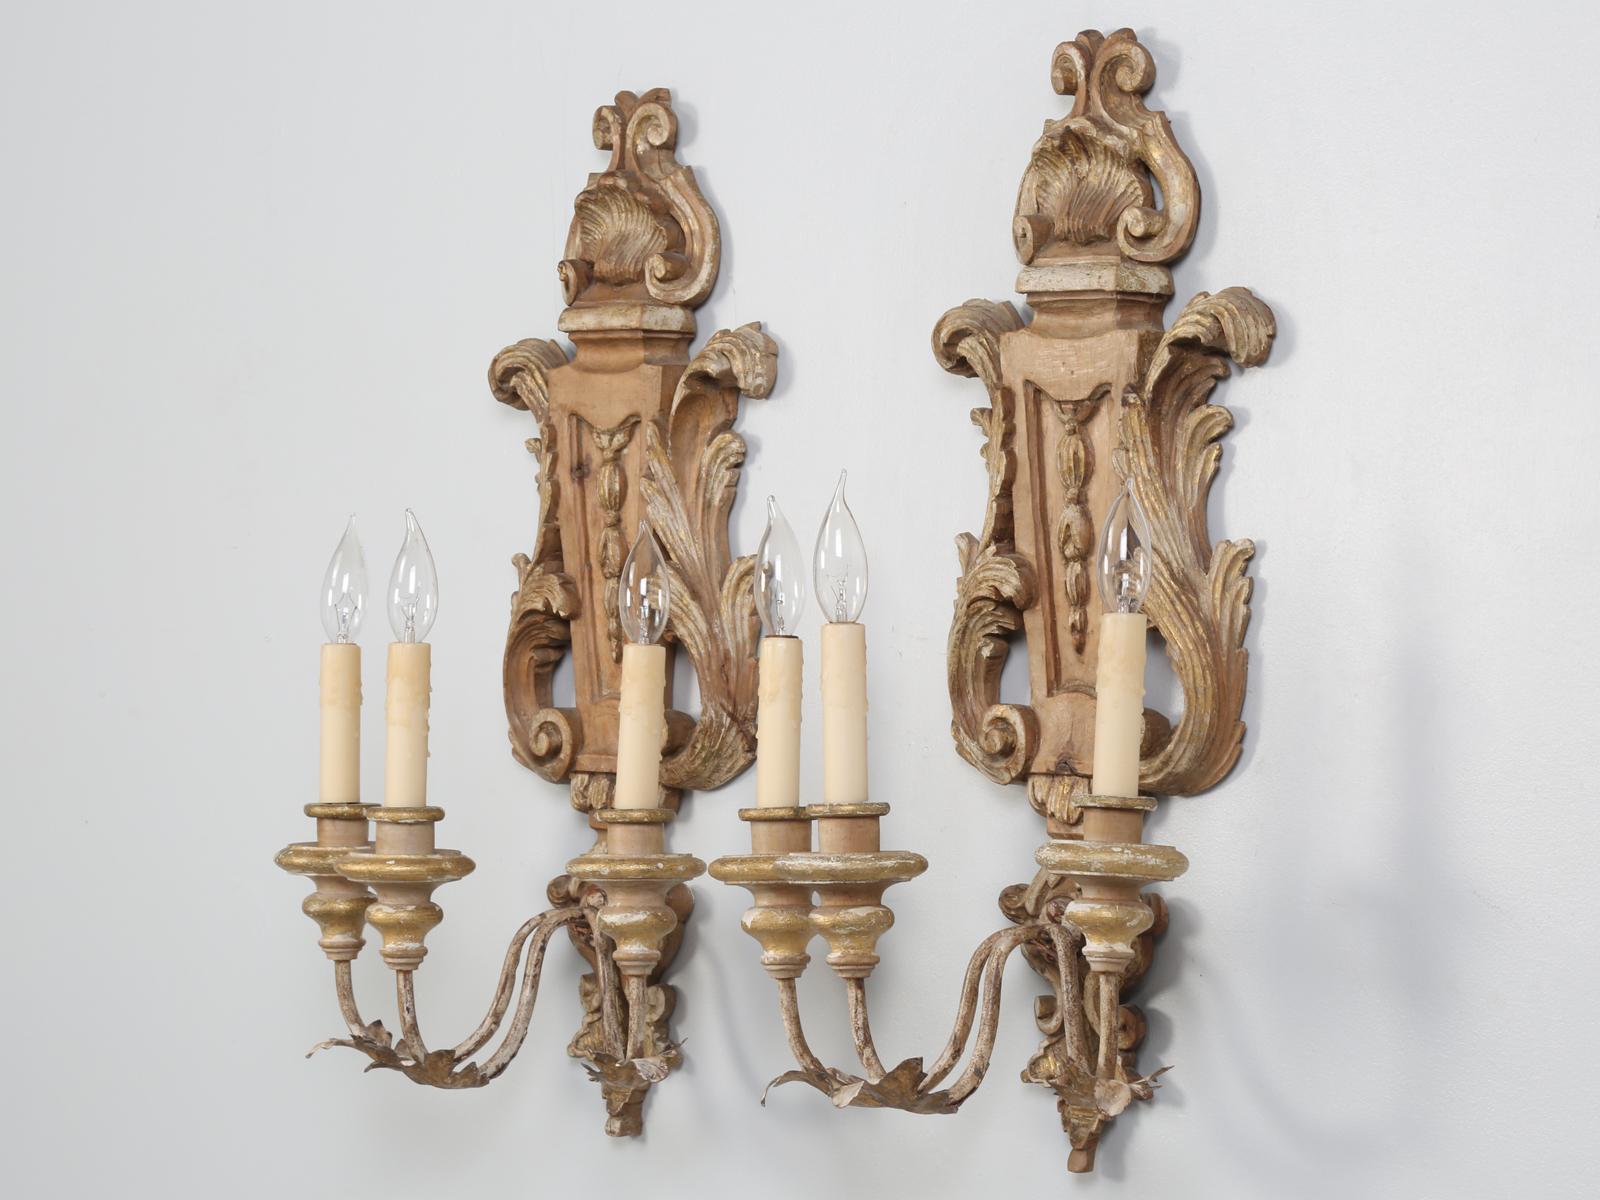 Beautiful pair of vintage Italian sconces, that were recently removed from a local house, so you know they were working. The matched pair of Italian wooden sconces were hand carved and probably date from the 1930s-1940s.